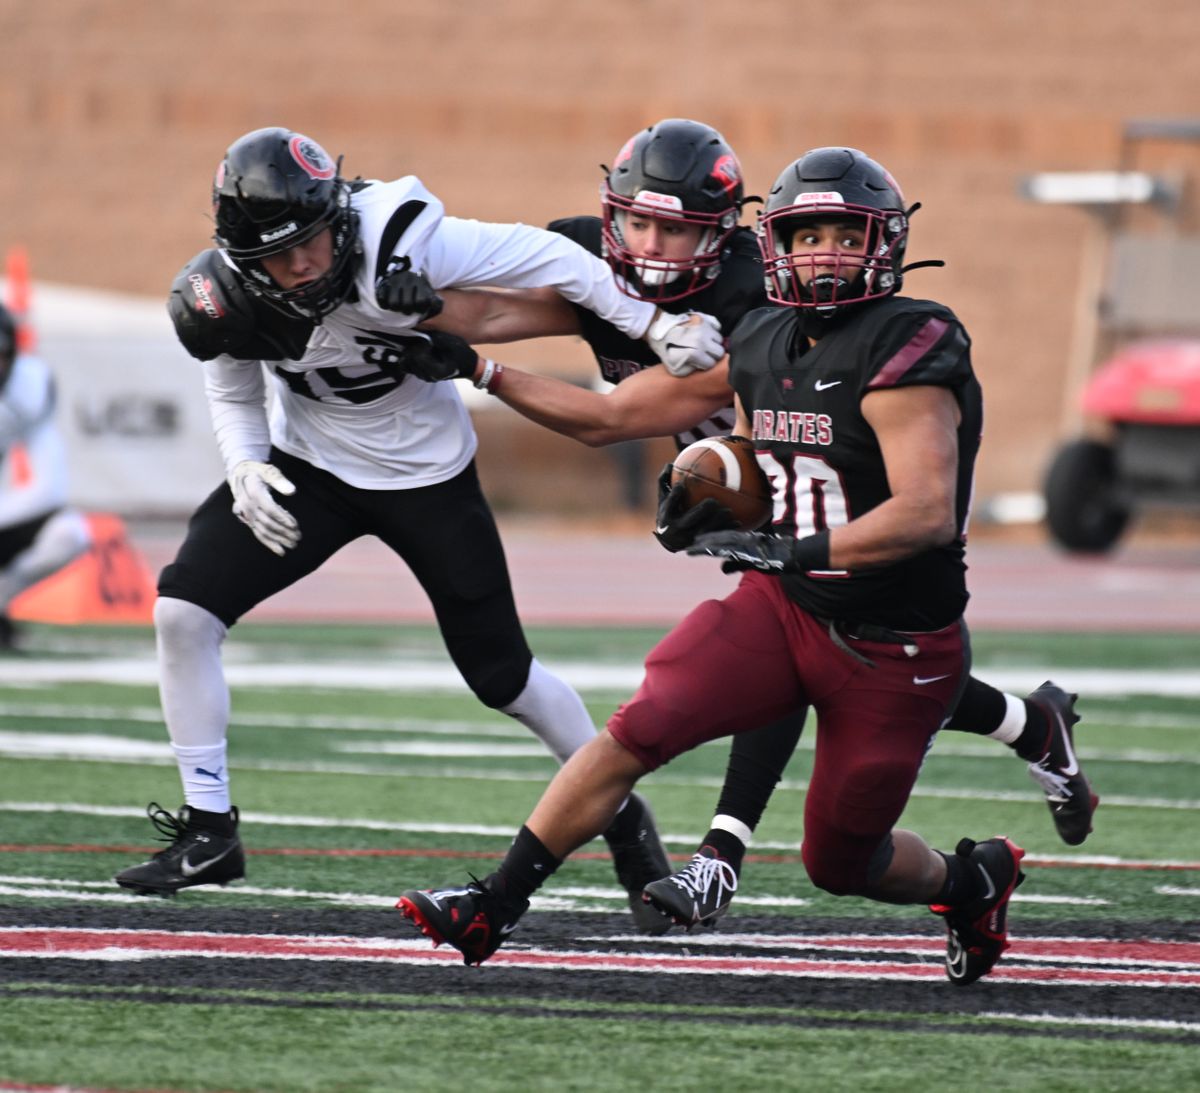 Whitworth running back Gio Ursino looks for running room against Chapman during last Saturday’s NCAA Division III first-round game at the Pirates’ Pine Bowl. The Pirates defeated the Panthers 42-28.  (Jesse Tinsley/The Spokesman-Review)